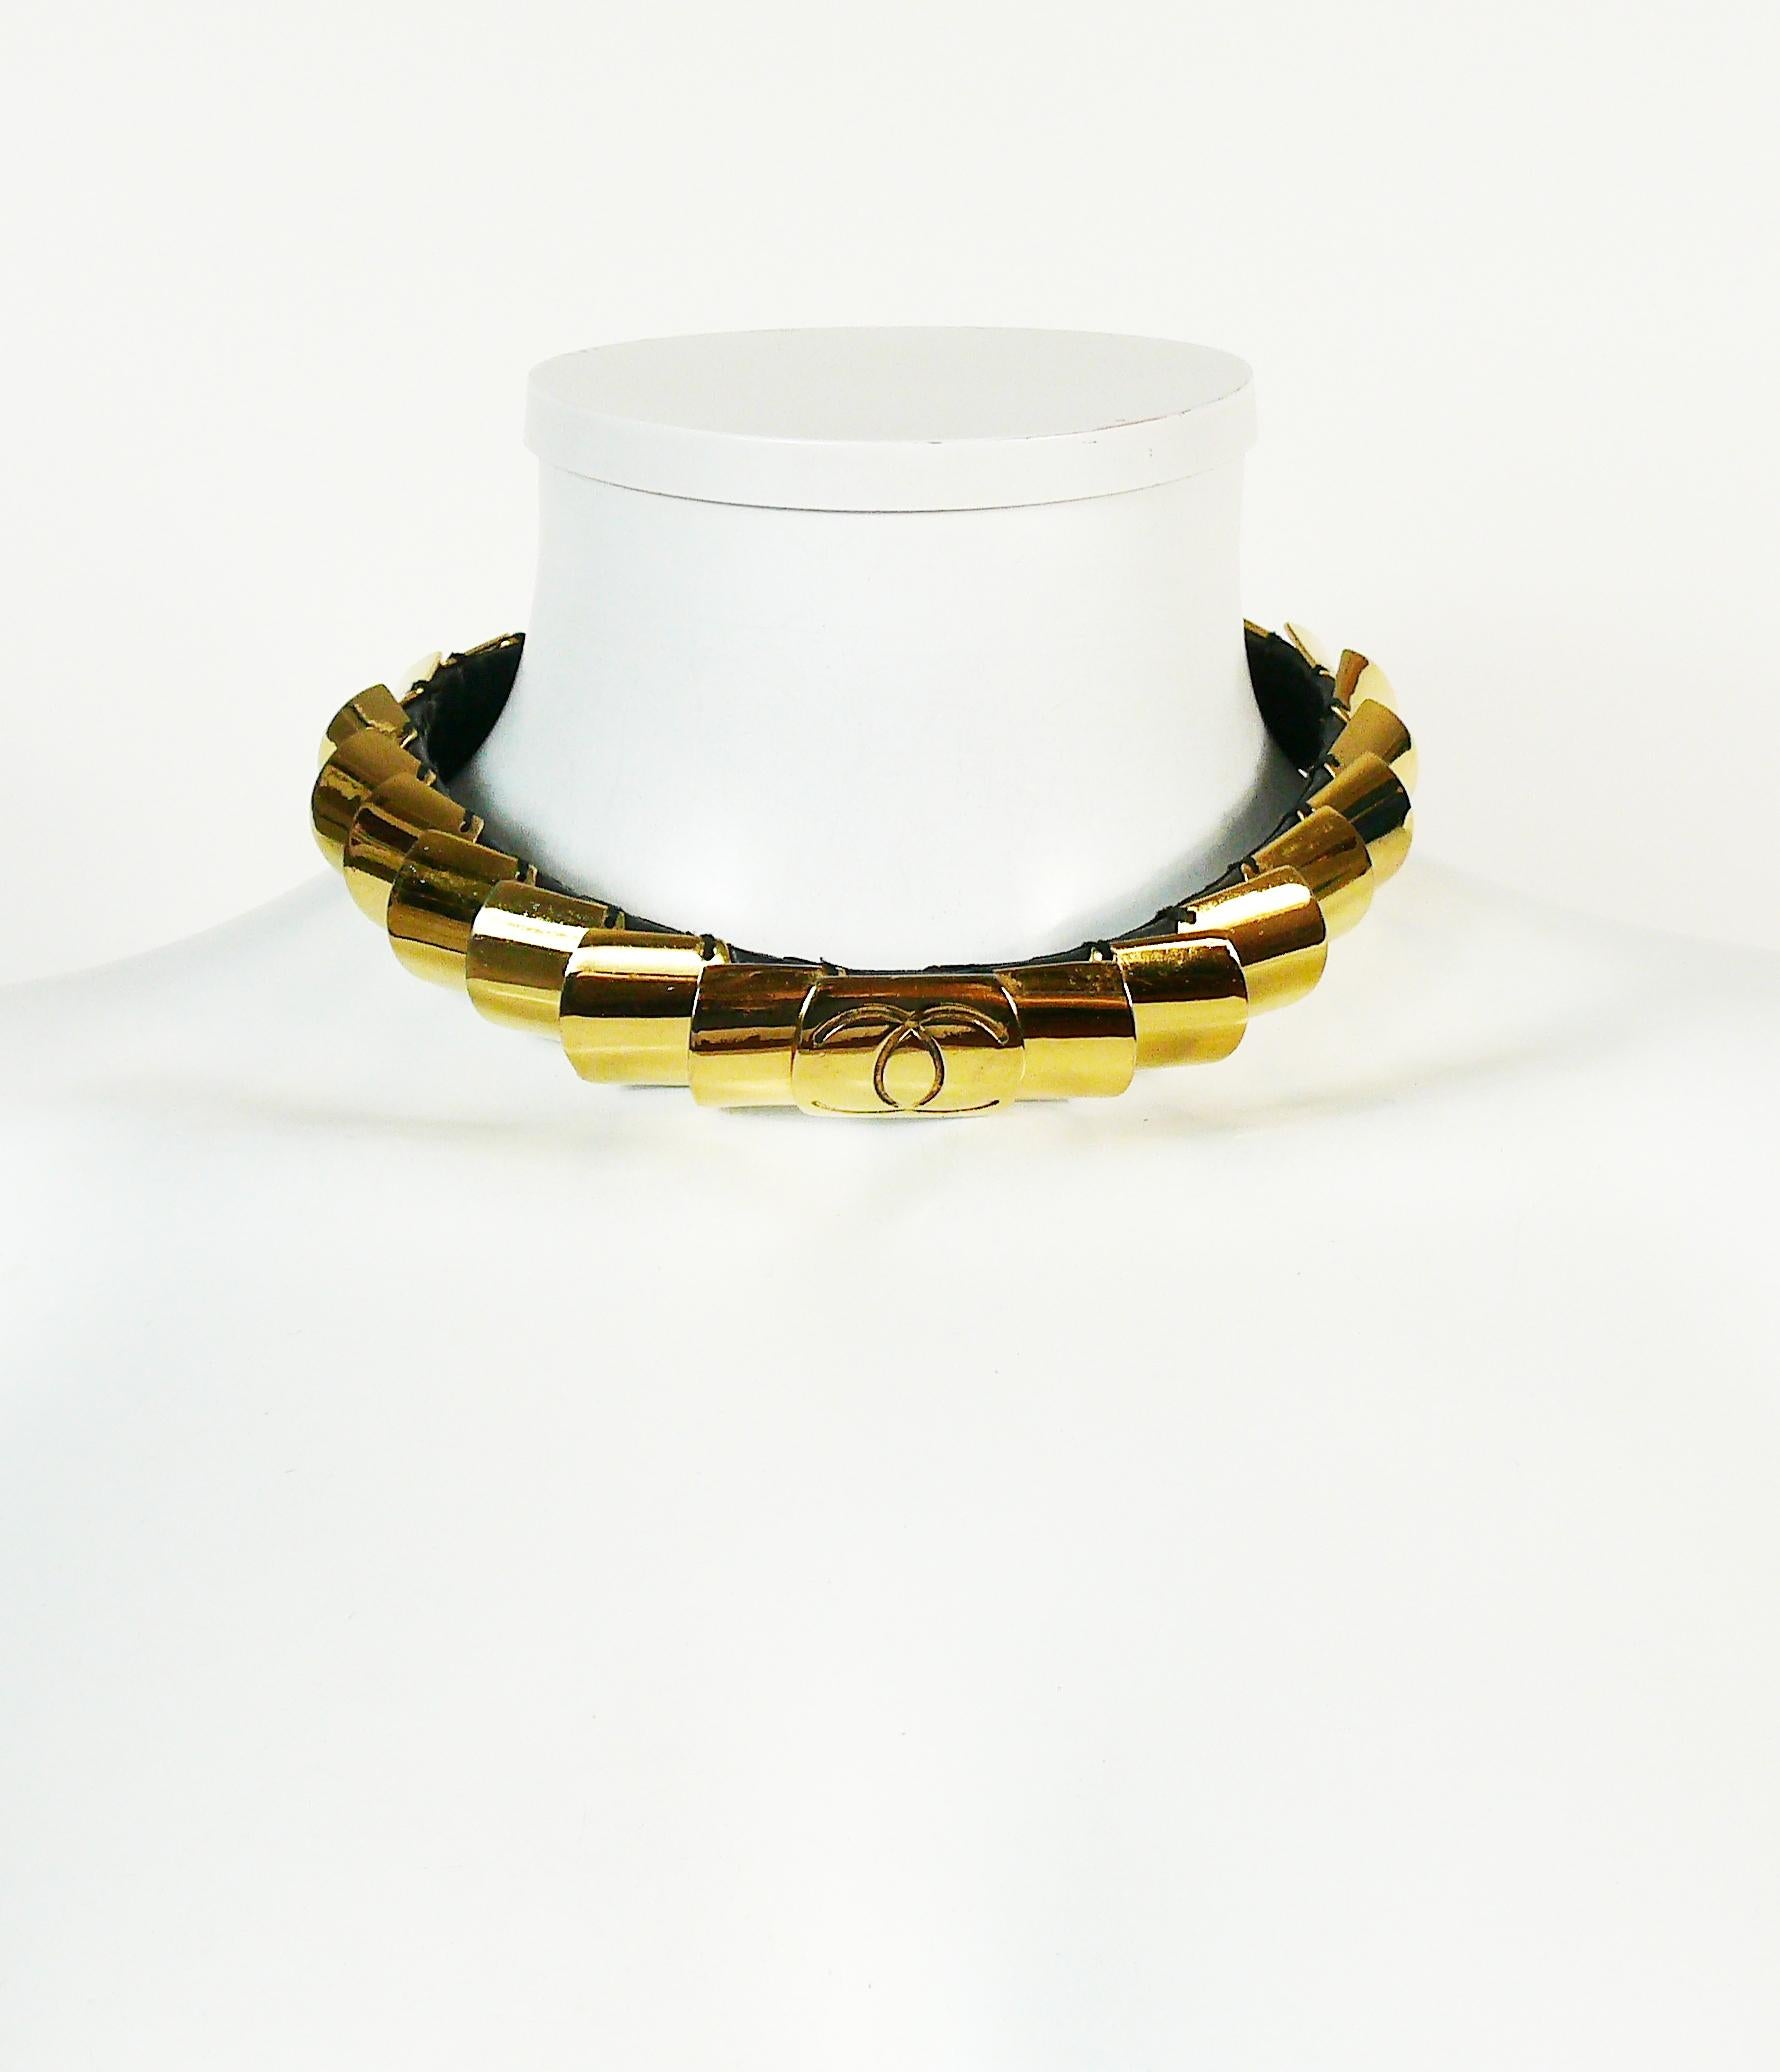 CHANEL vintage rare choker necklace made of black leather covered with gold toned polished scales and a large CC logo on front.

Marked CHANEL PARIS Made in France

Indicative measurements : circumference approx. 40.84 cm (16.08 inches) / width